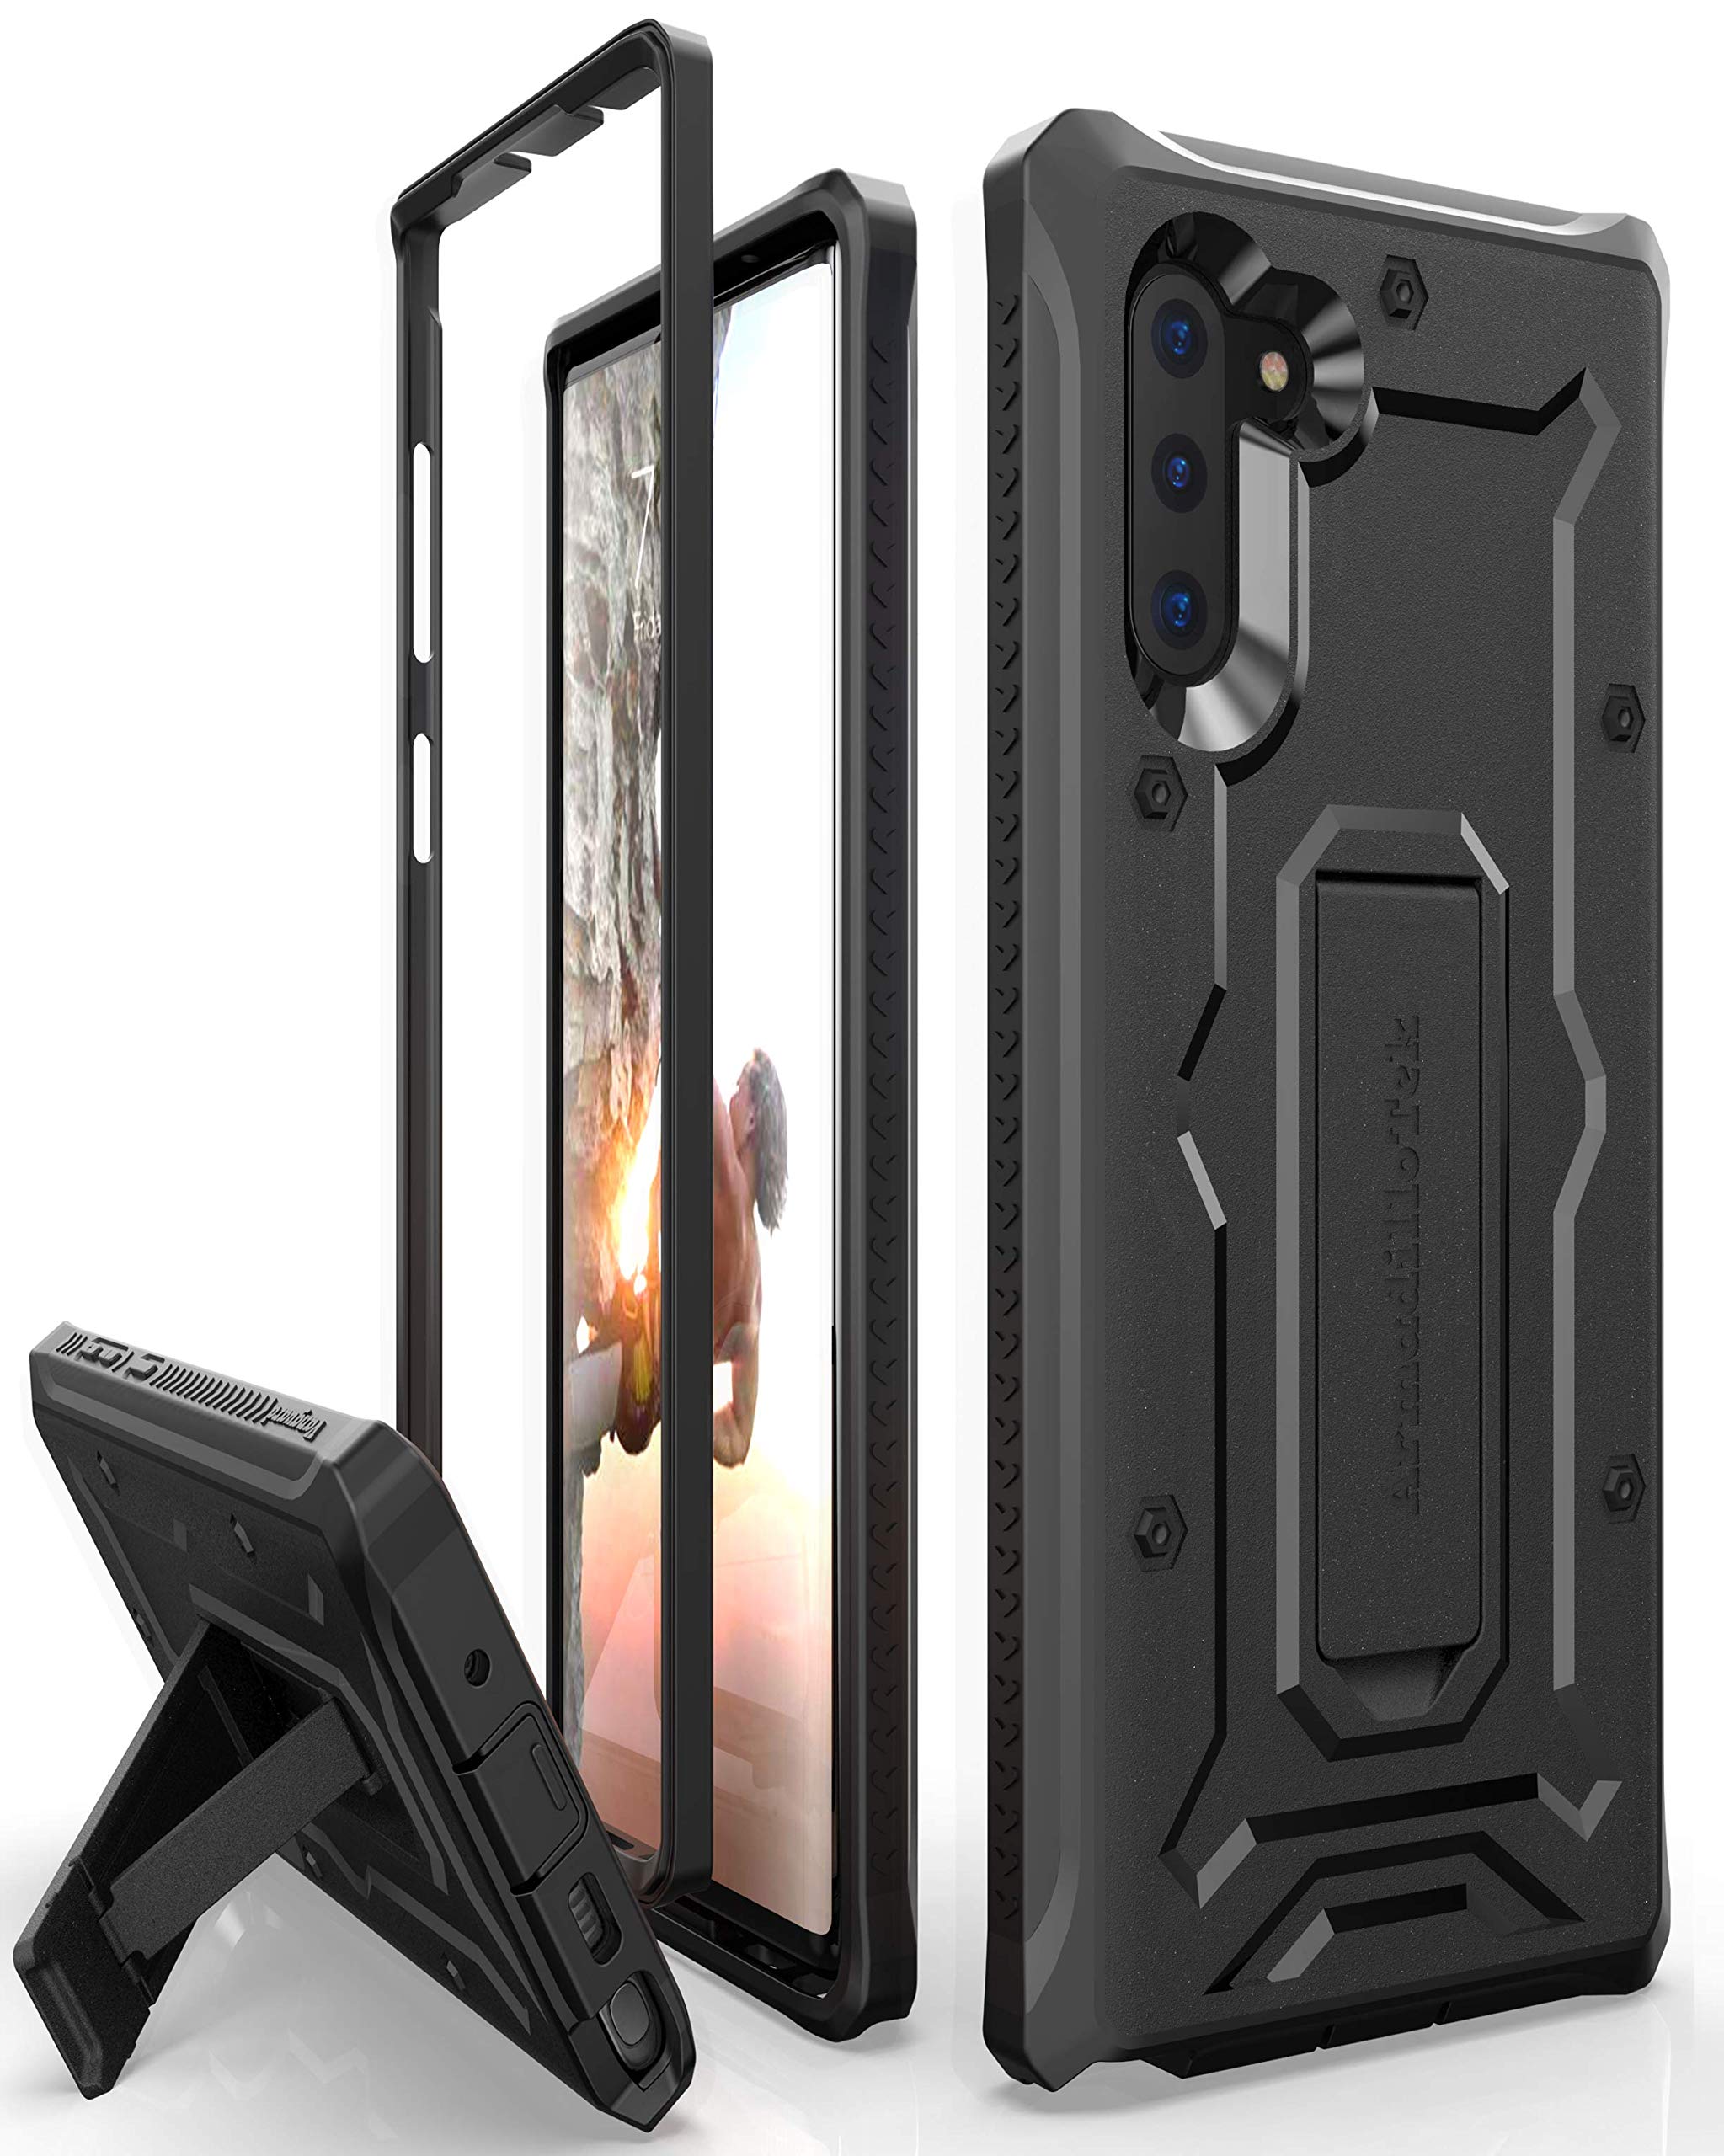 Book Cover ArmadilloTek Vanguard Designed for Samsung Galaxy Note 10 Case (2019 Release) Military Grade Full-Body Rugged with Kickstand Without Built-in Screen Protector - Black